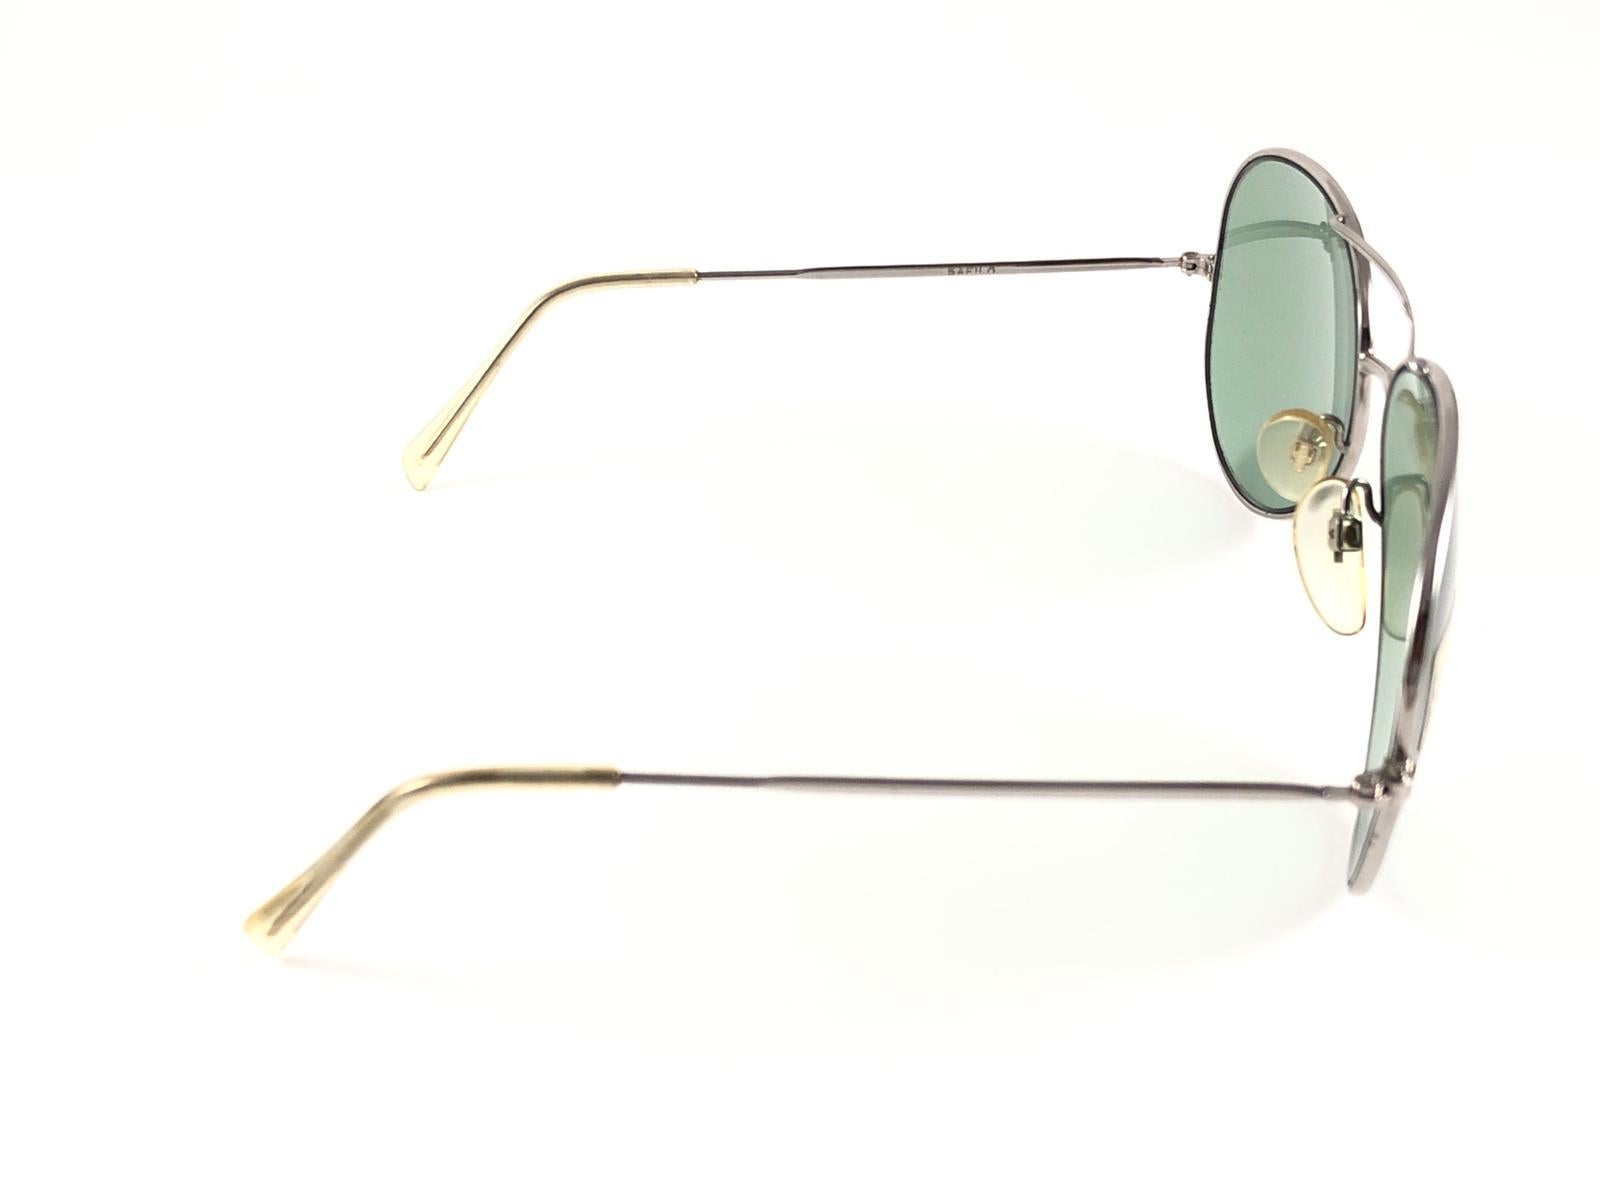 New Vintage Safilo Jet Silver Aviator Frame 1980's Sunglasses Made in Italy For Sale 3